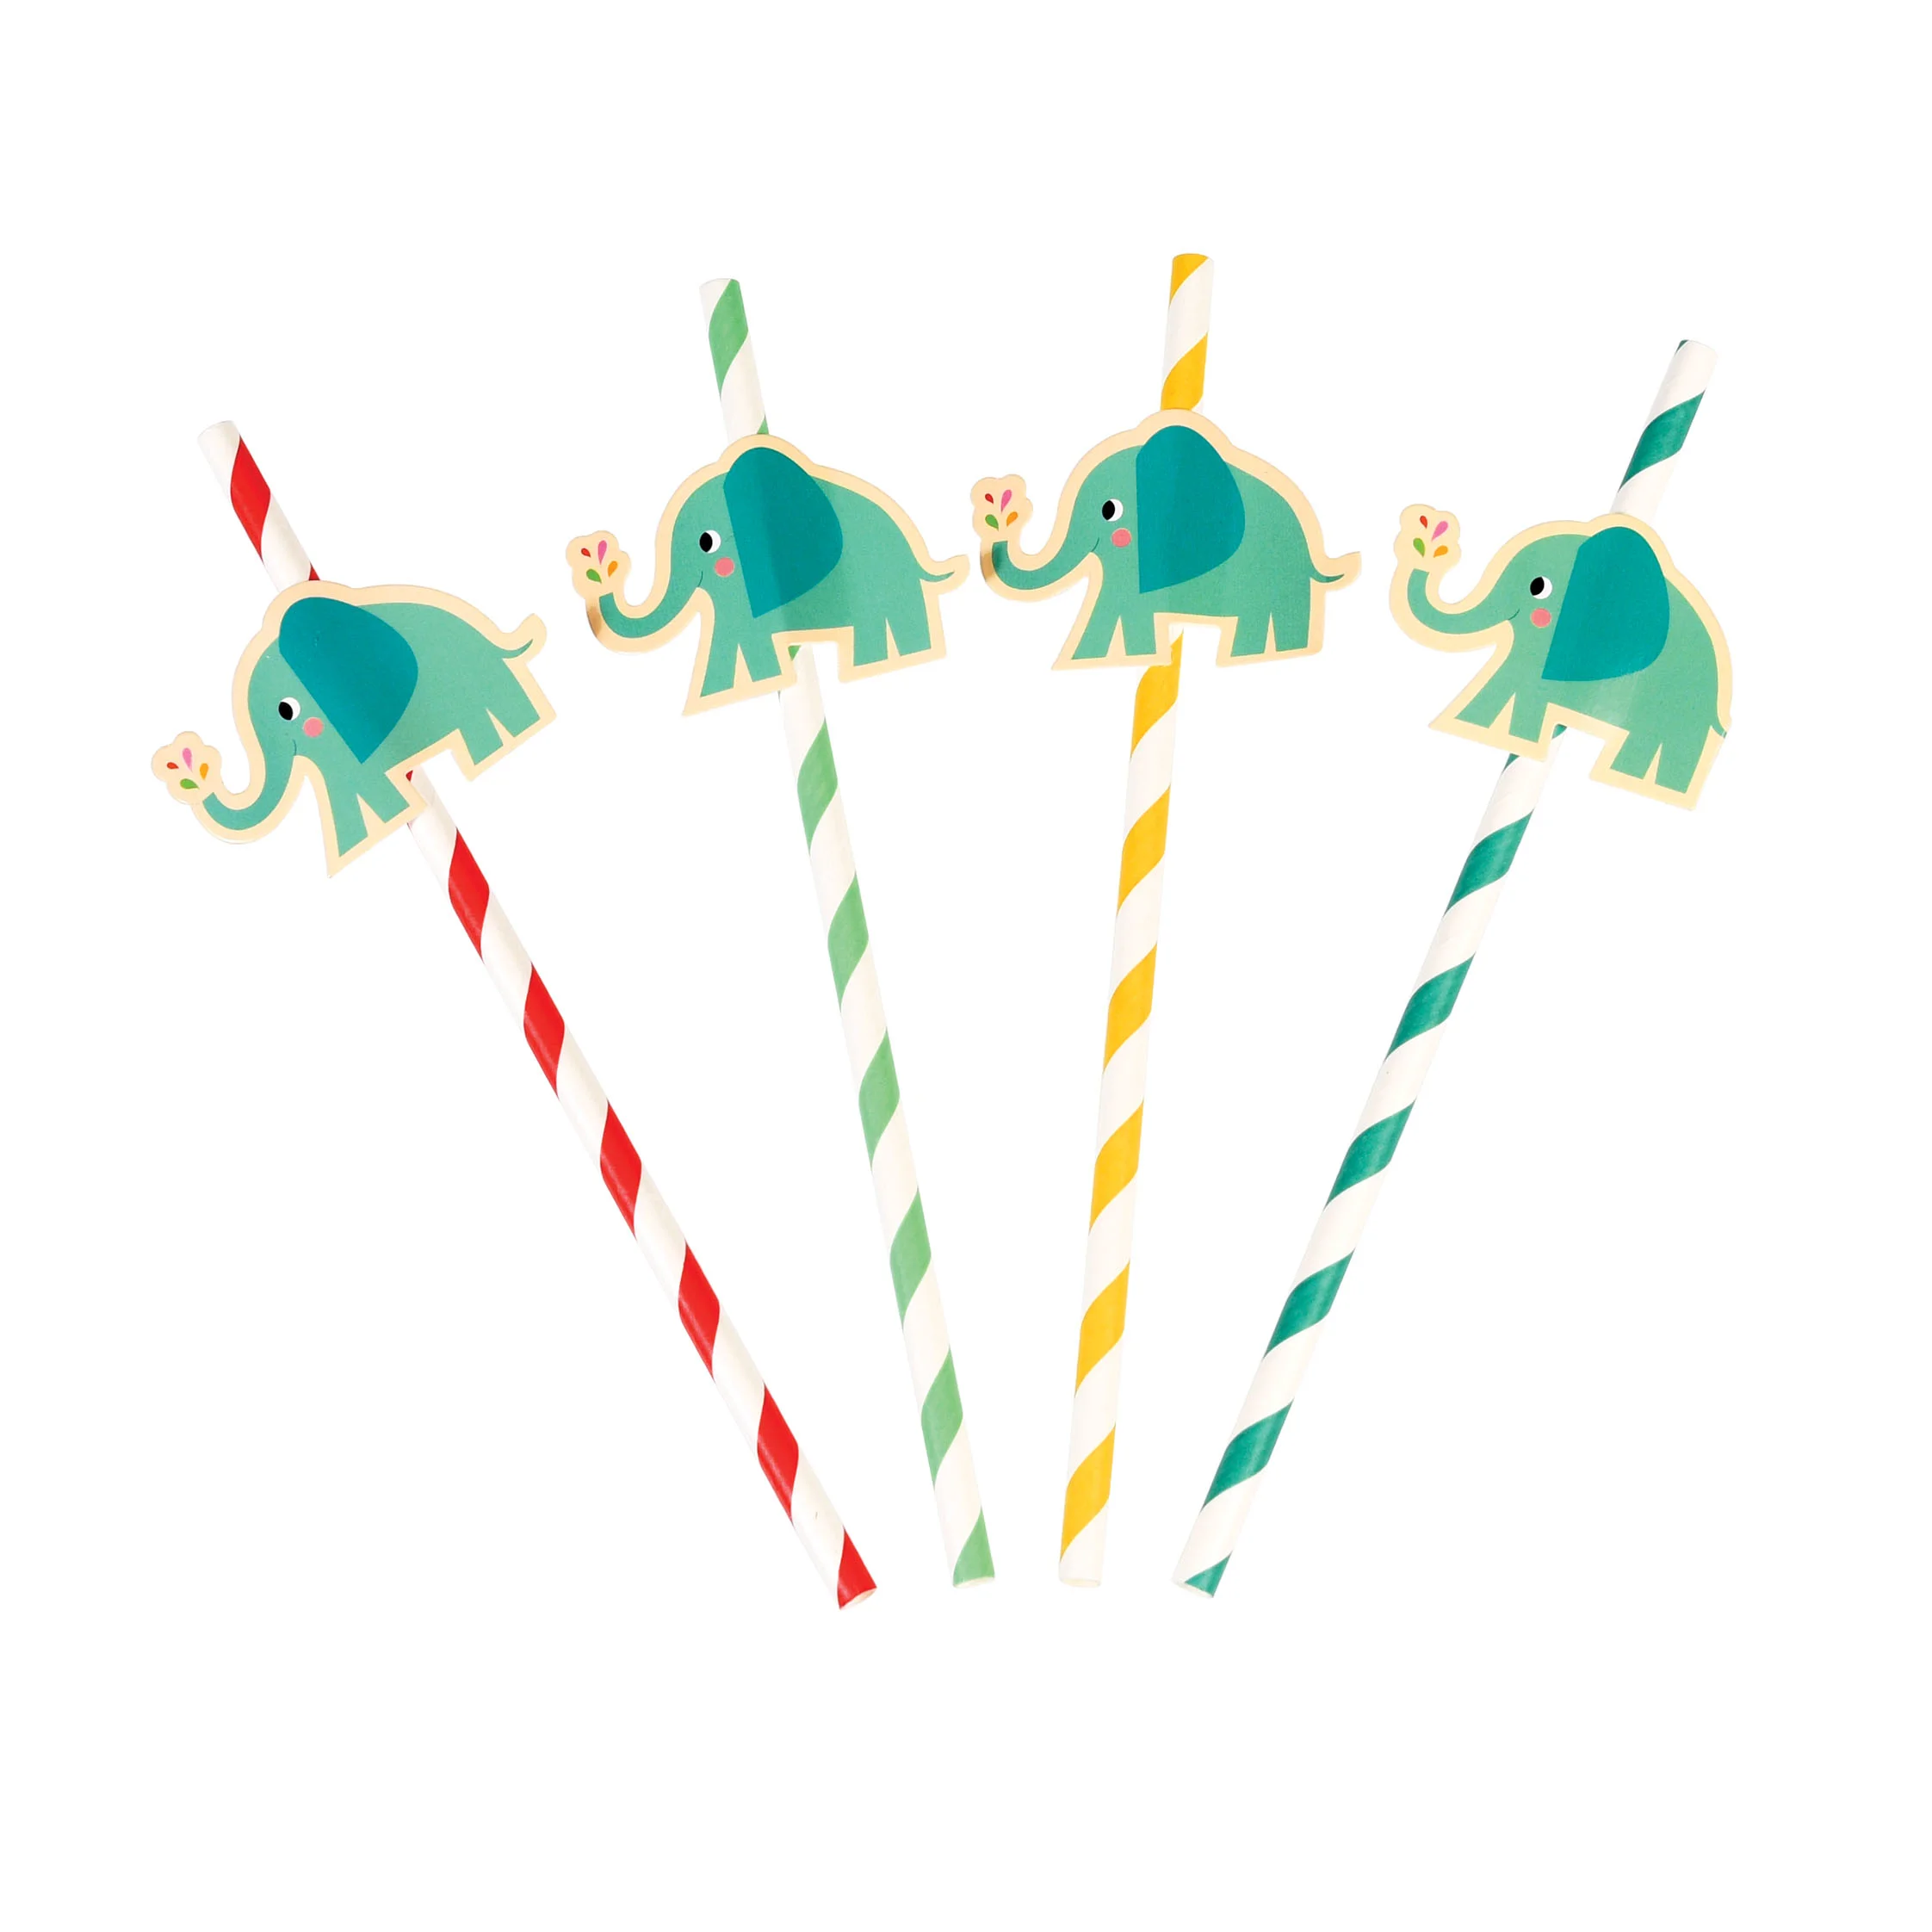 party straws (pack of 4) - elvis the elephant